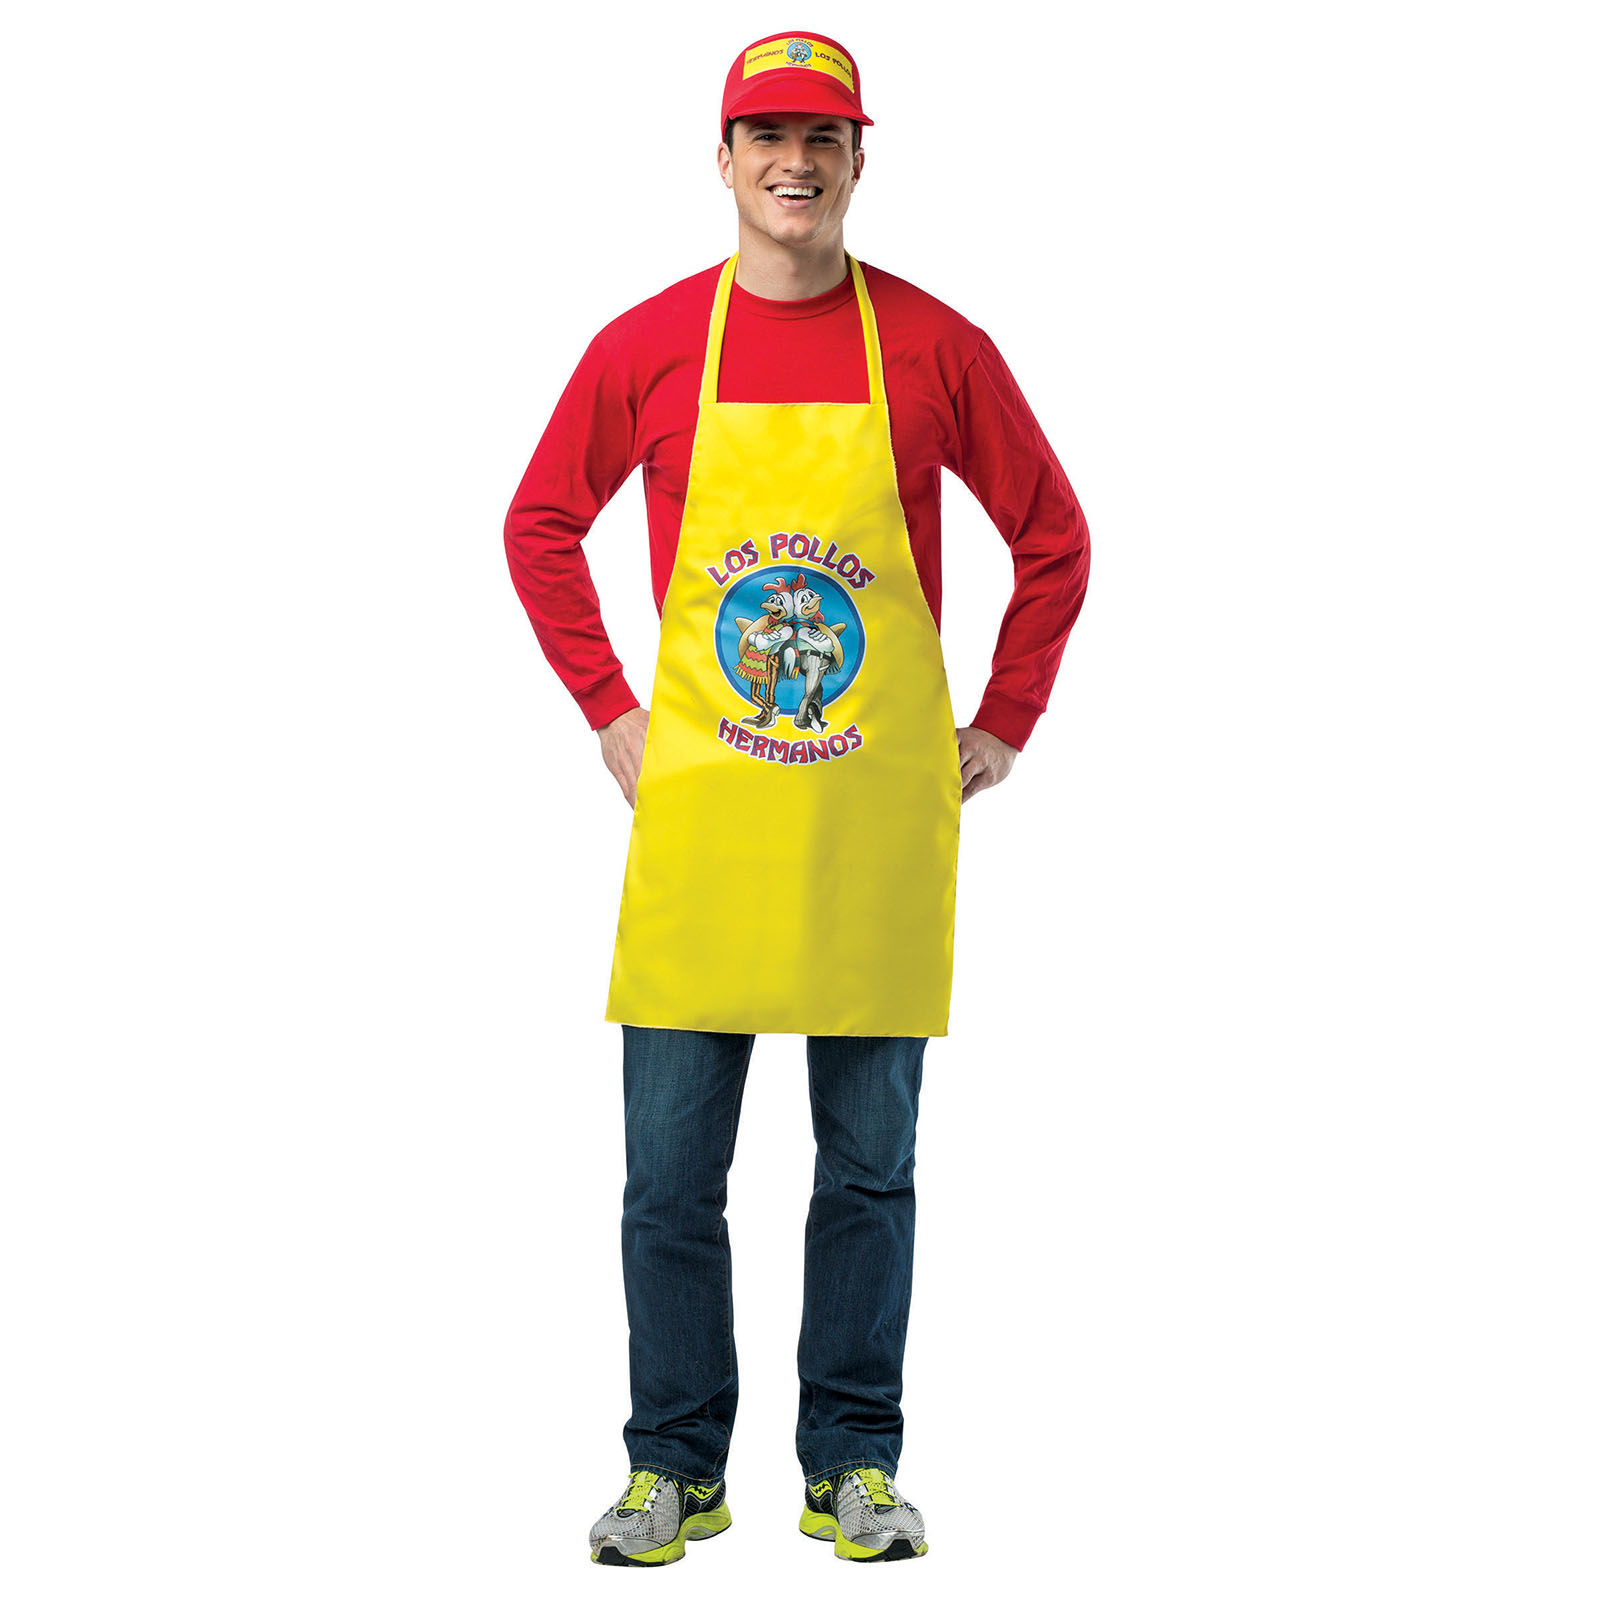 Breaking Bad - Apron and Visor Size: One Size Fits Most